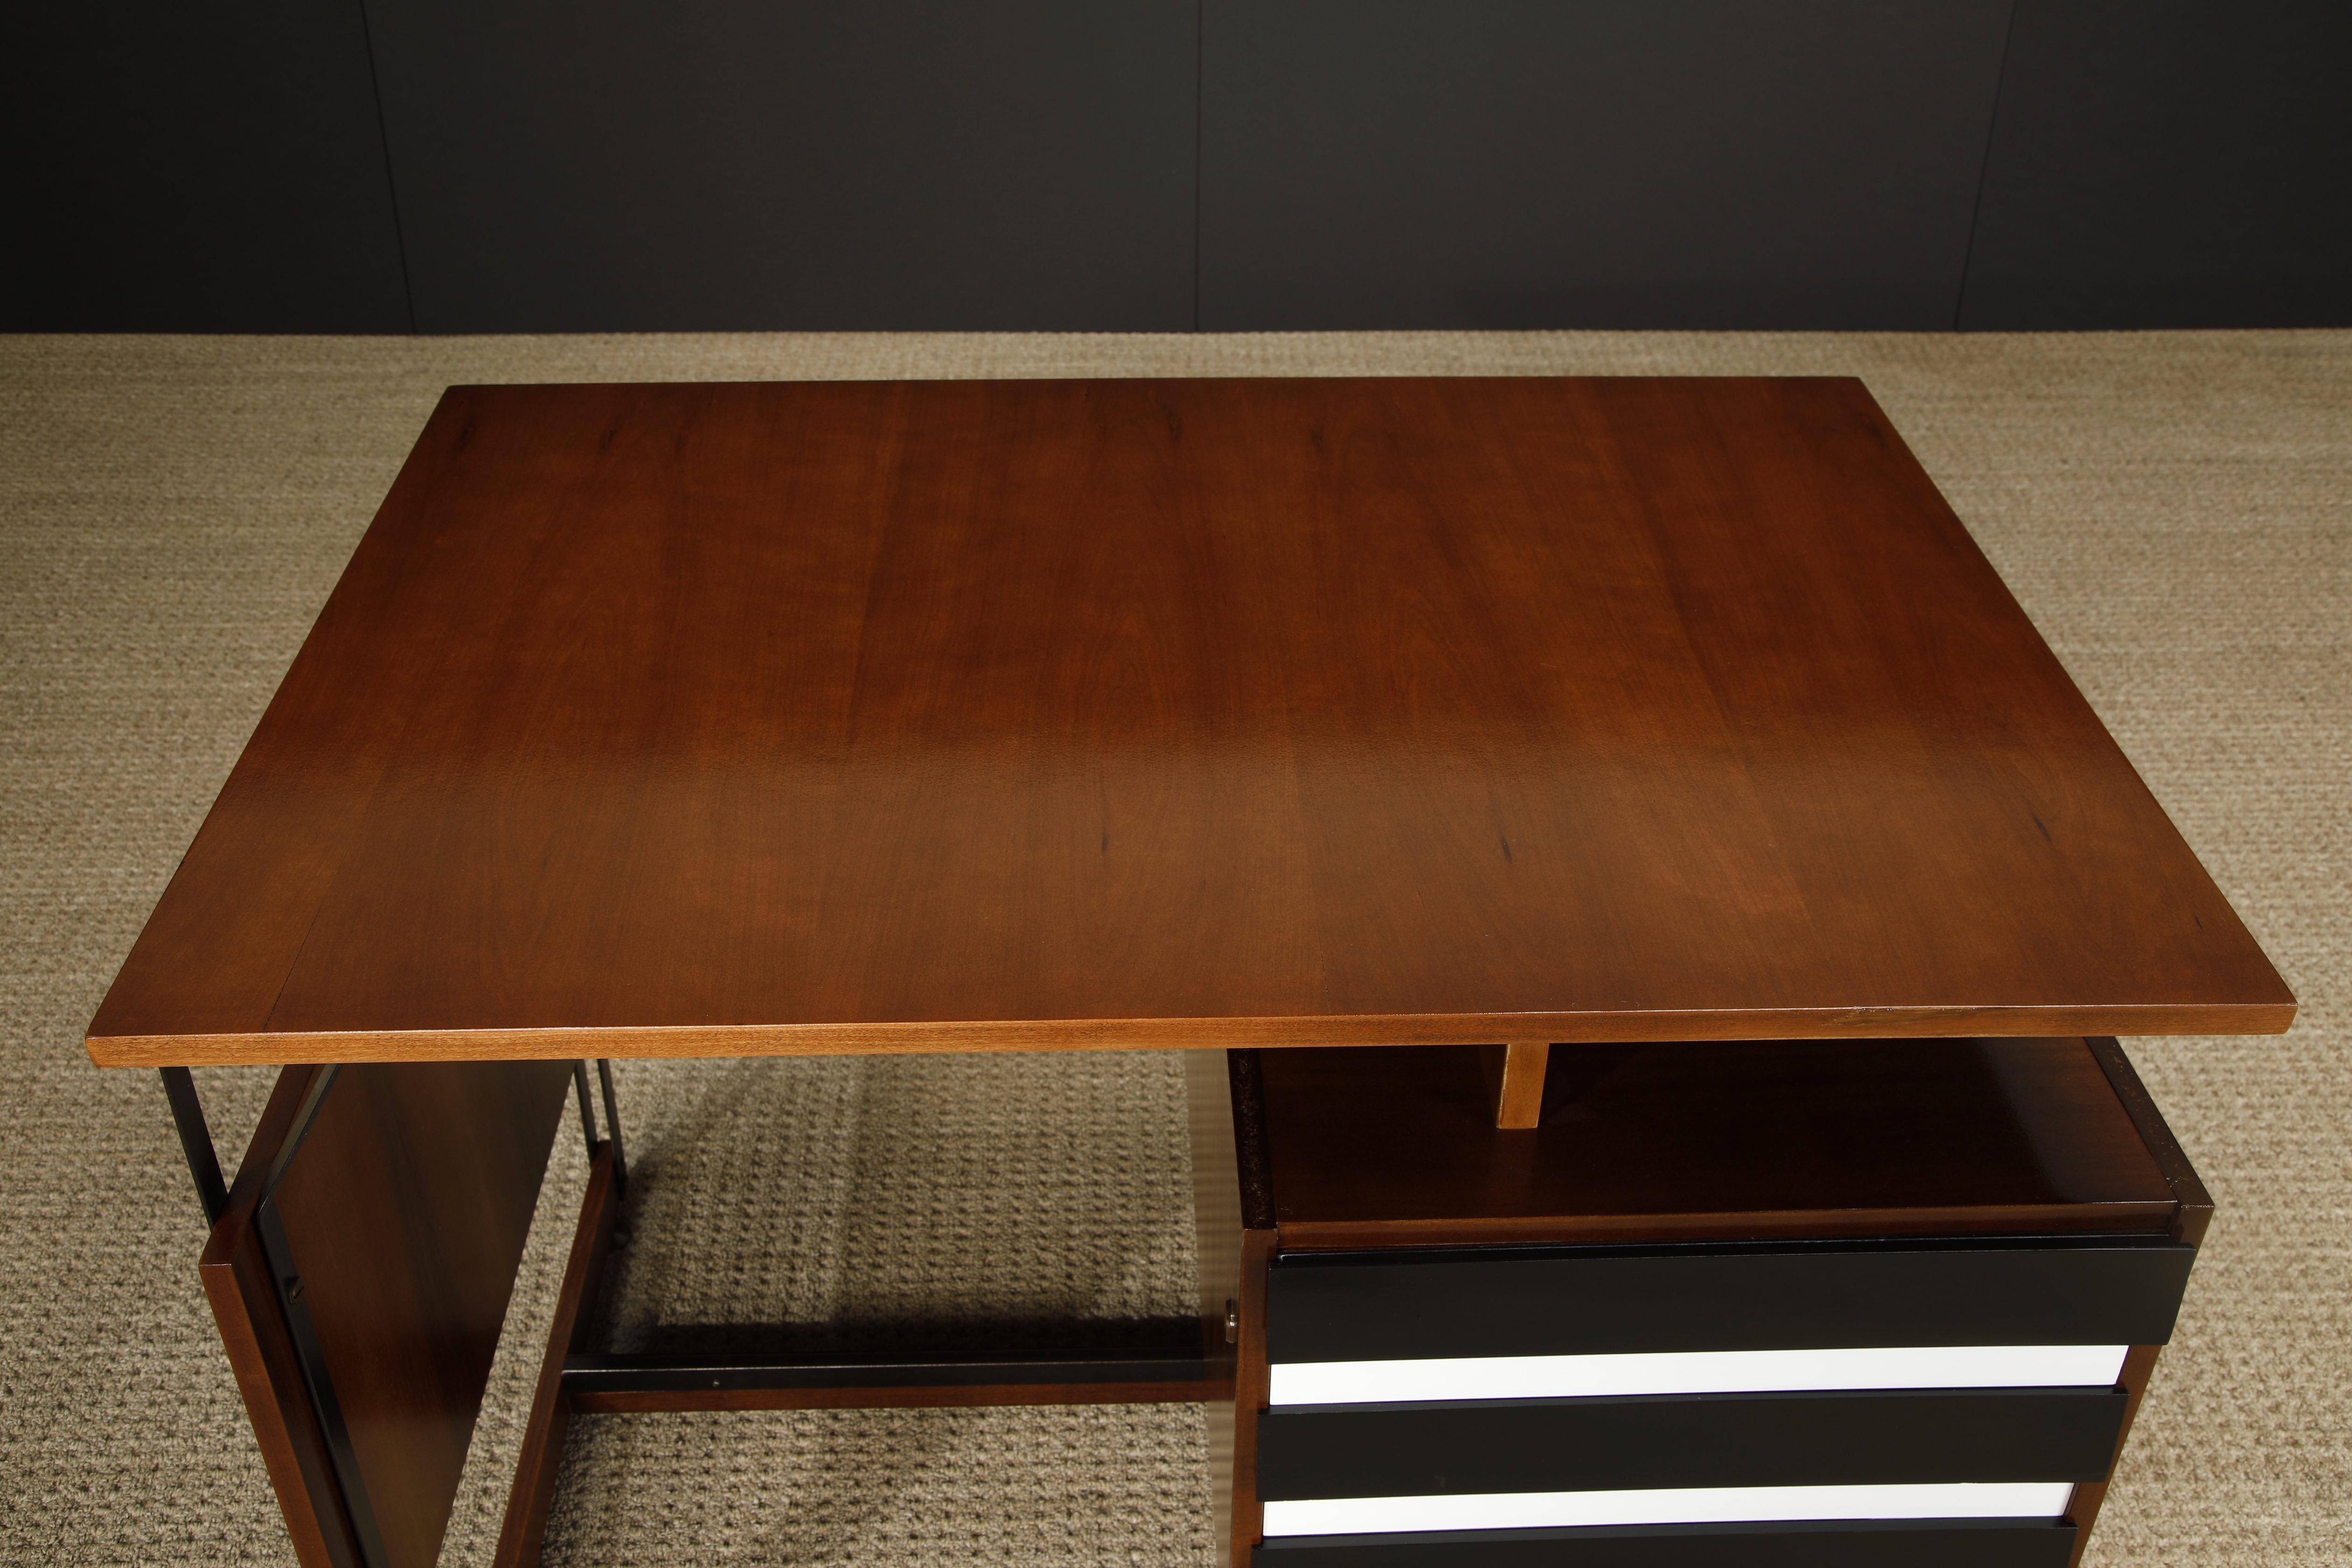 Italian Mid-Century Modern Desk, Style of Gio Ponti, c 1950s, Refinished For Sale 8